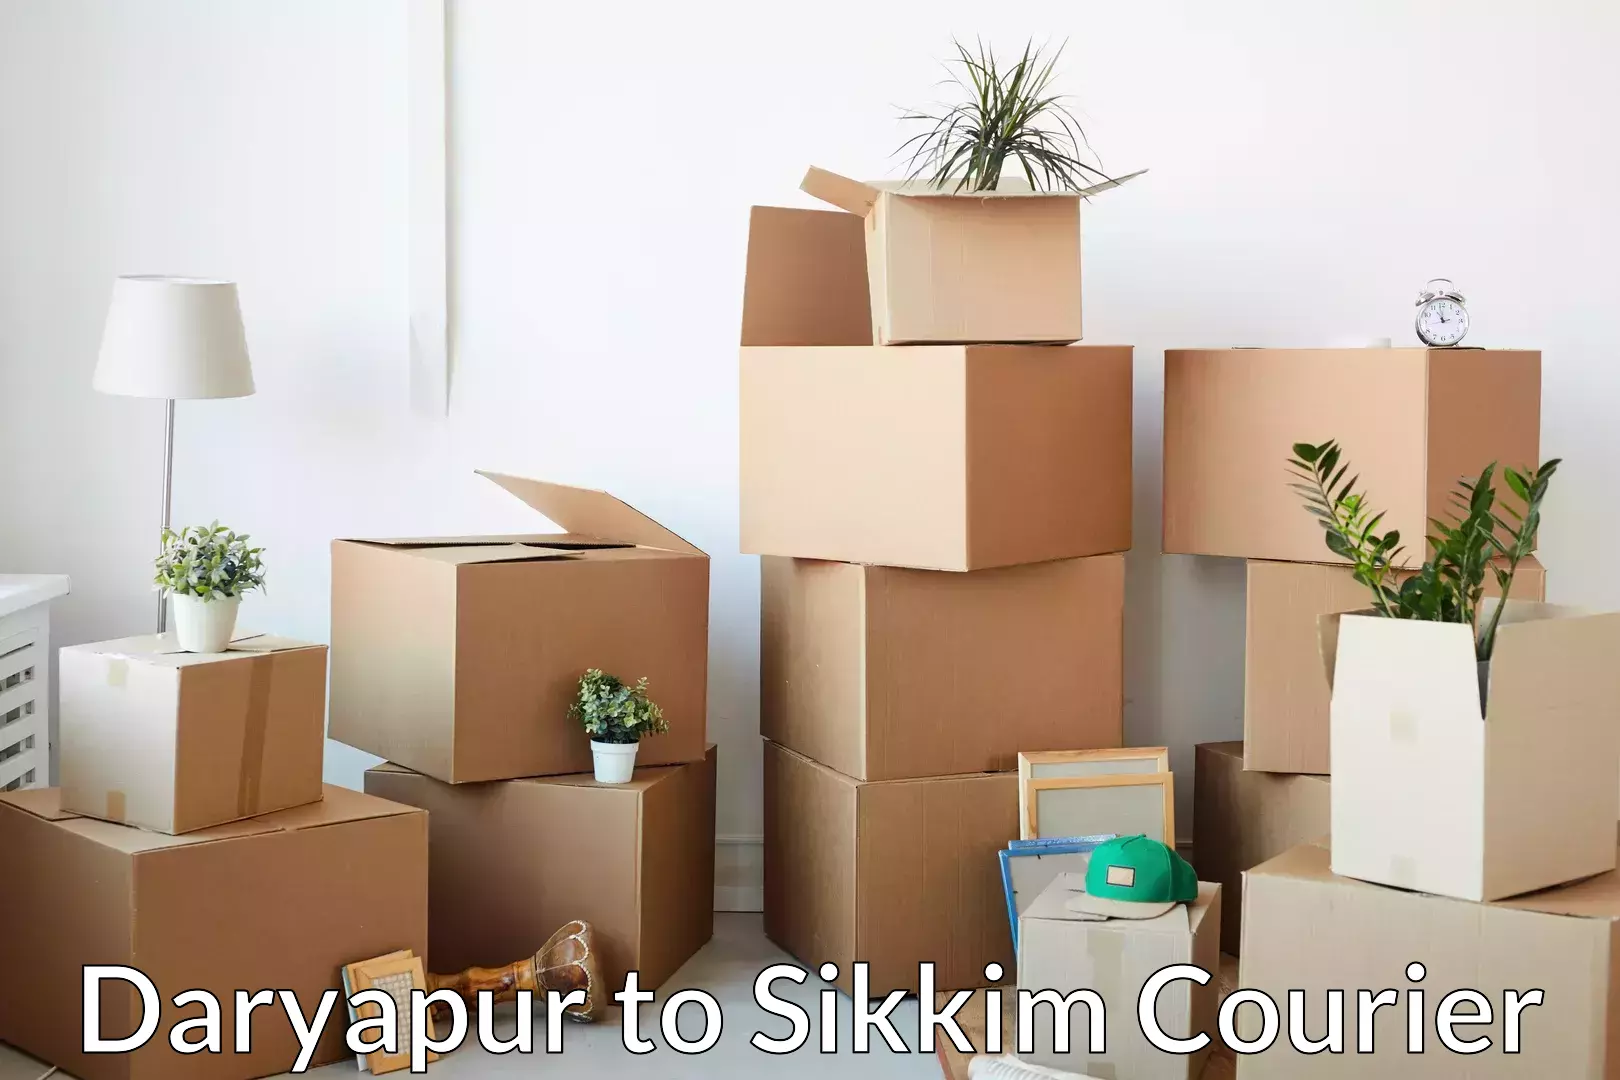 Professional moving company Daryapur to Pelling